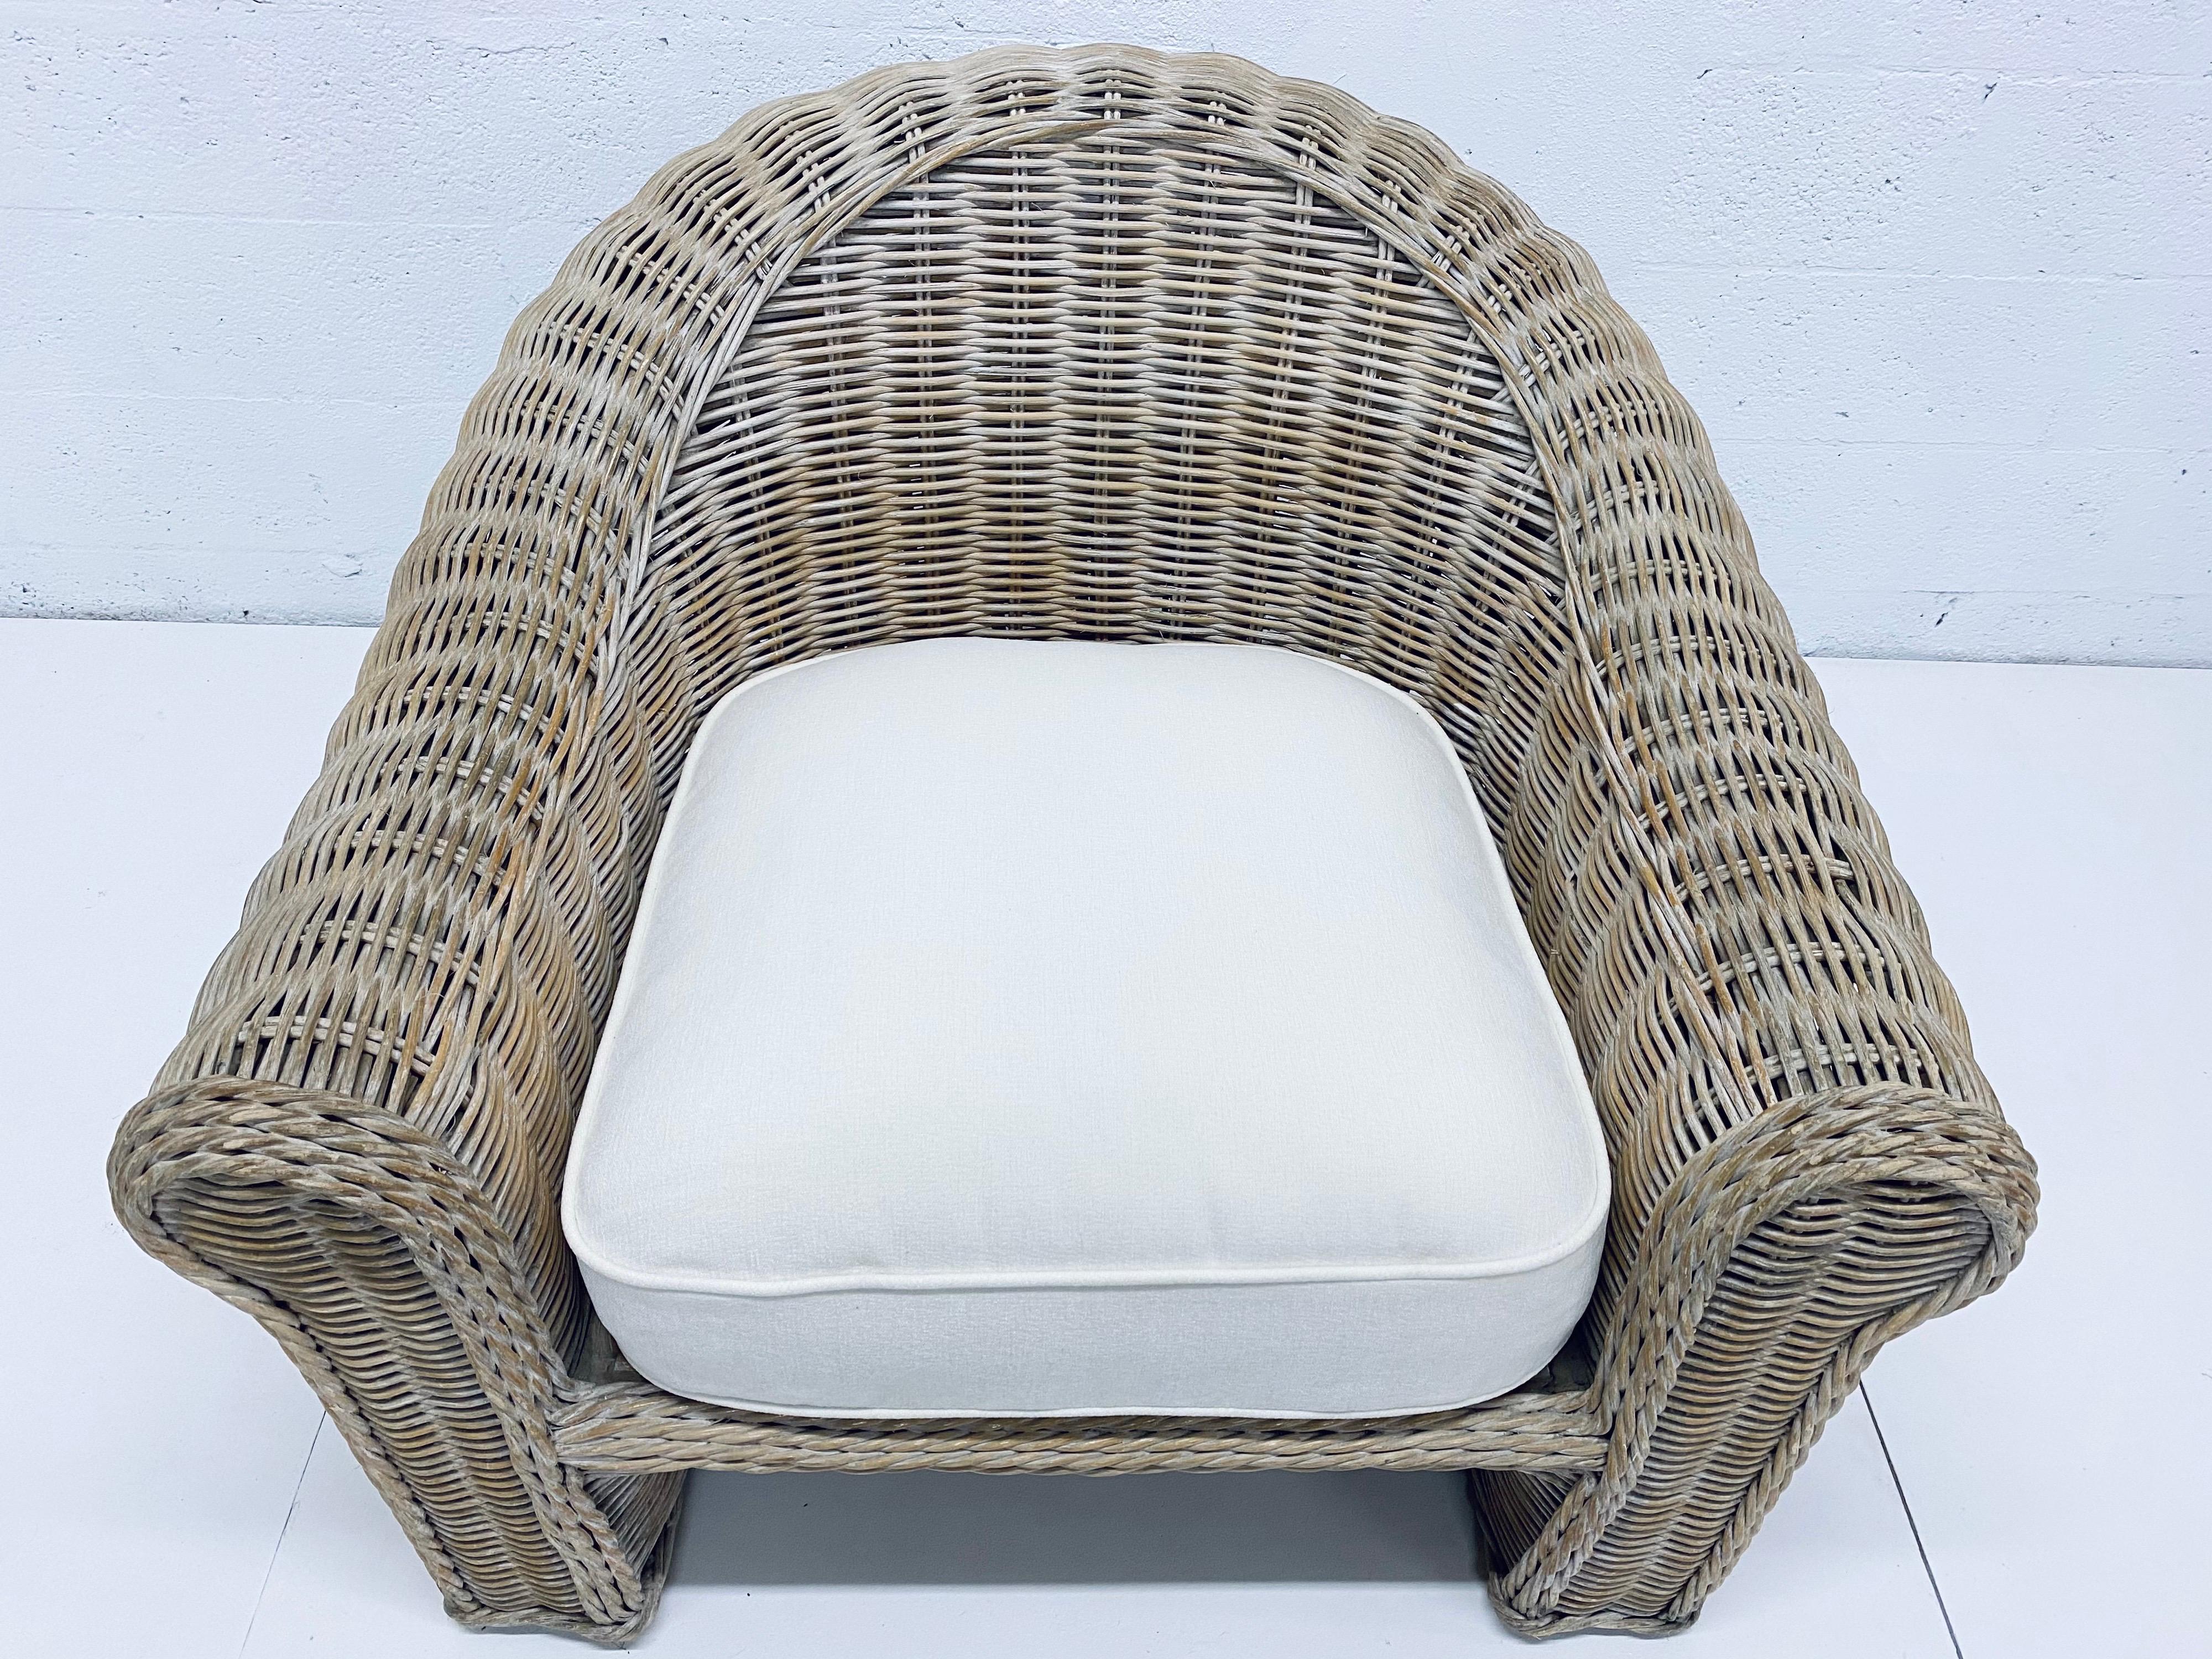 1970s woven whitewashed reeded lounge chair with newly upholstered high quality white cotton linen indoor cushion. The seat supports have also been redone to provide many more years of use. High quality and very comfortable lounge chair.